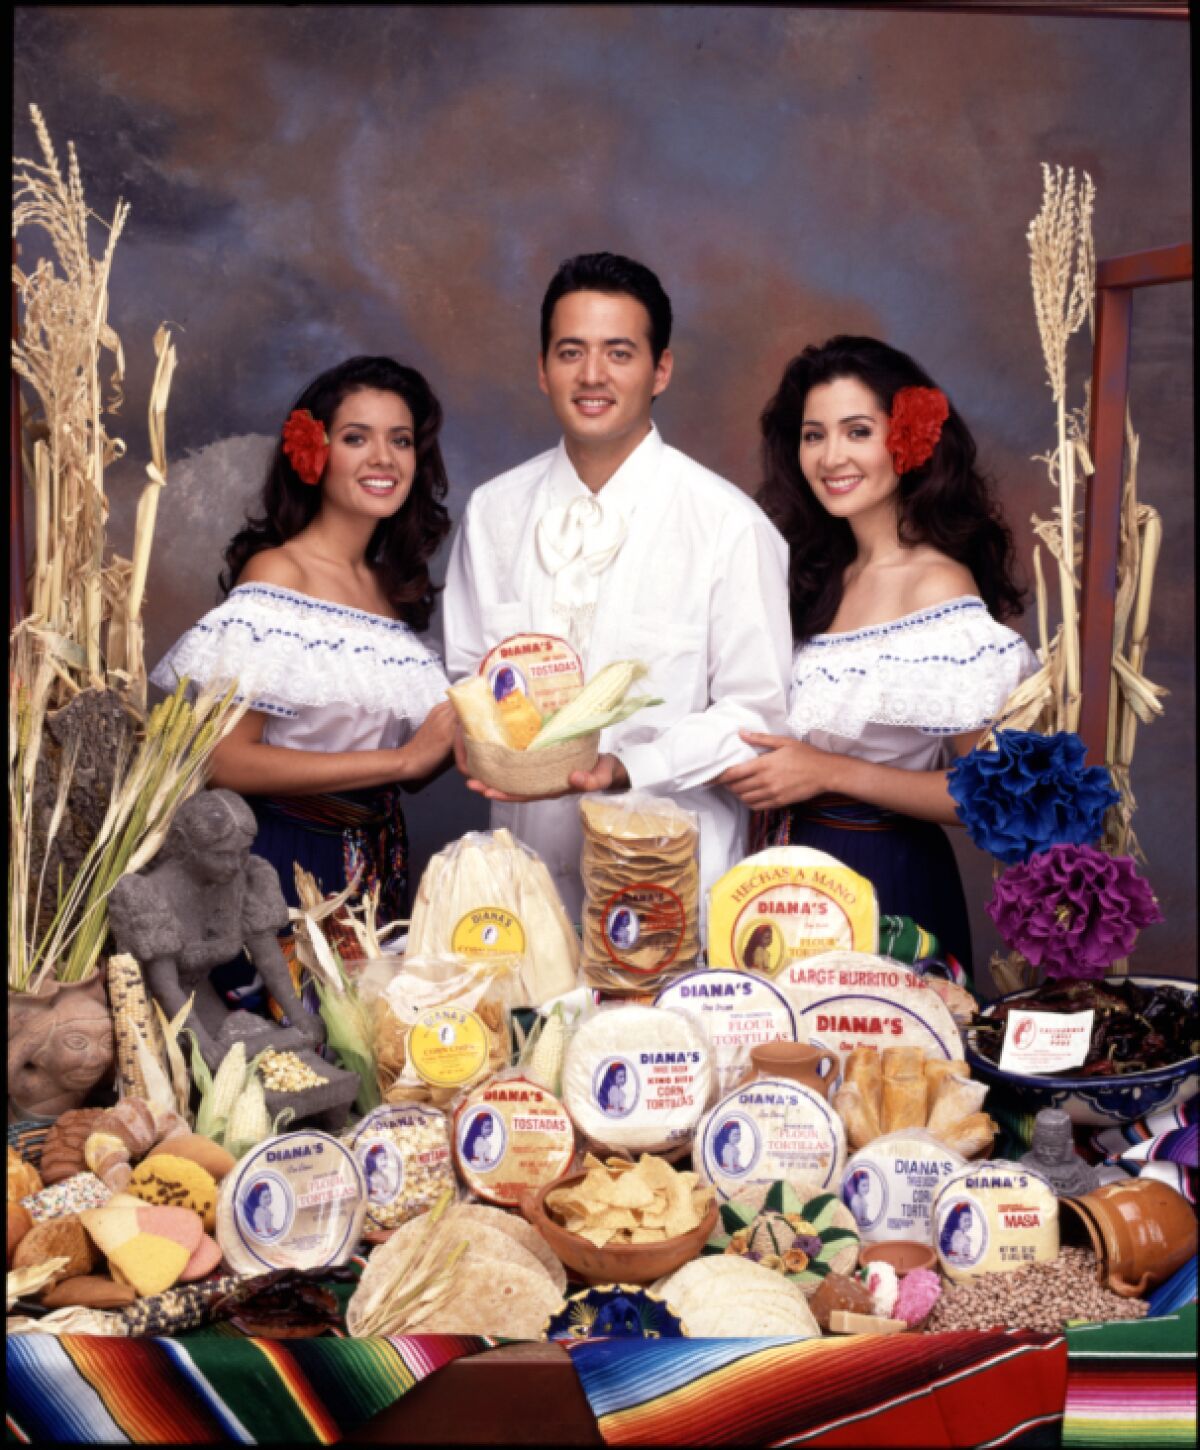 Tensha, Sam Jr. and Diana Magaña appear in a 1994 publicity photo for Diana's Mexican Food Products.